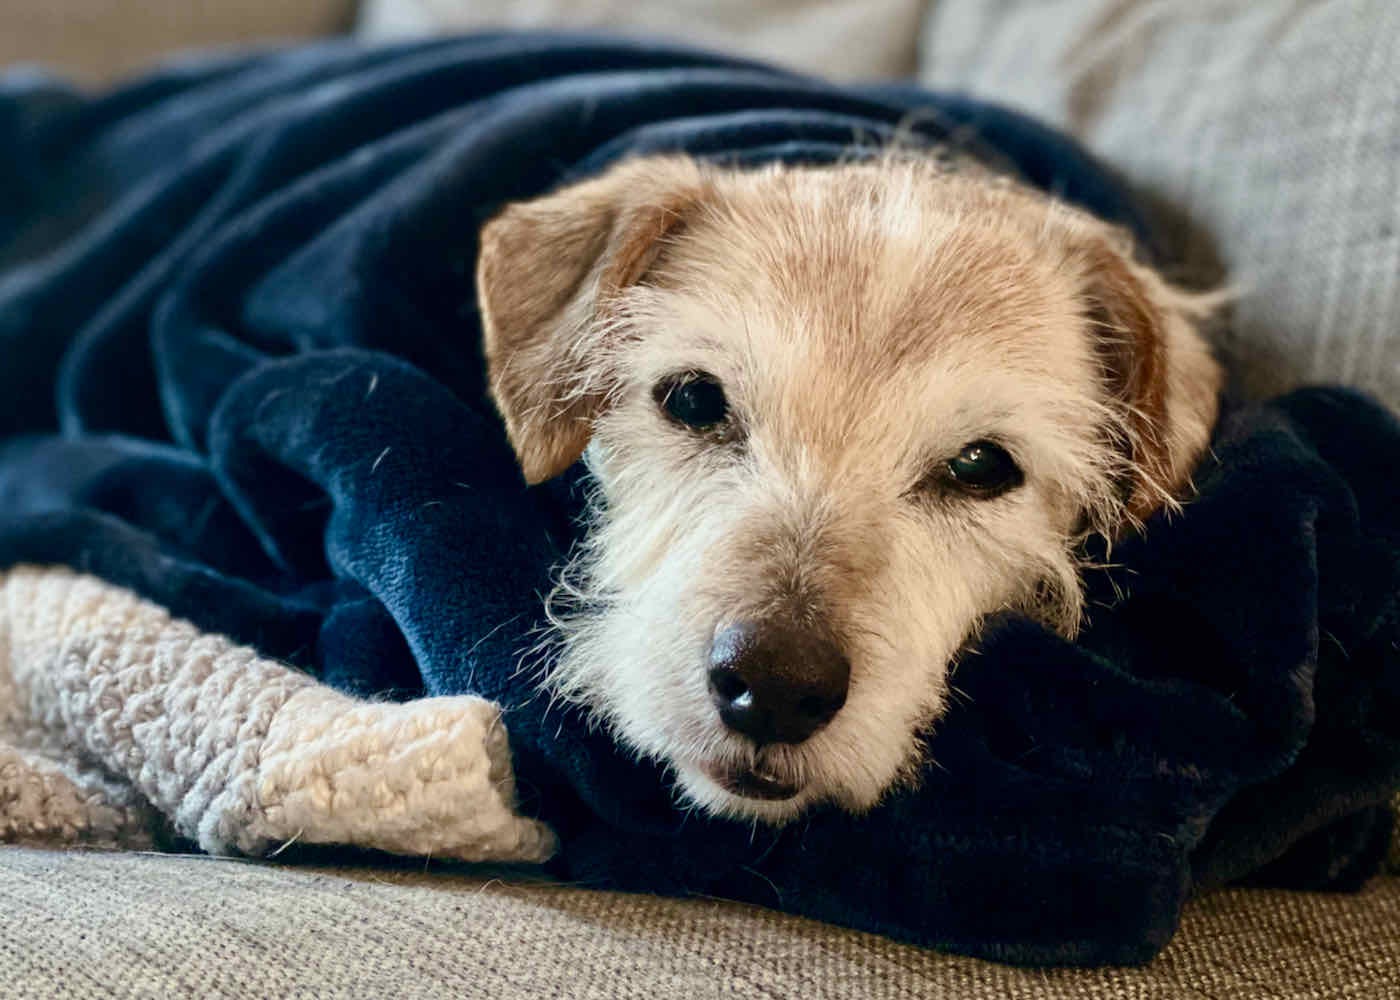 Fozzie wrapped up in a dark blue blanket